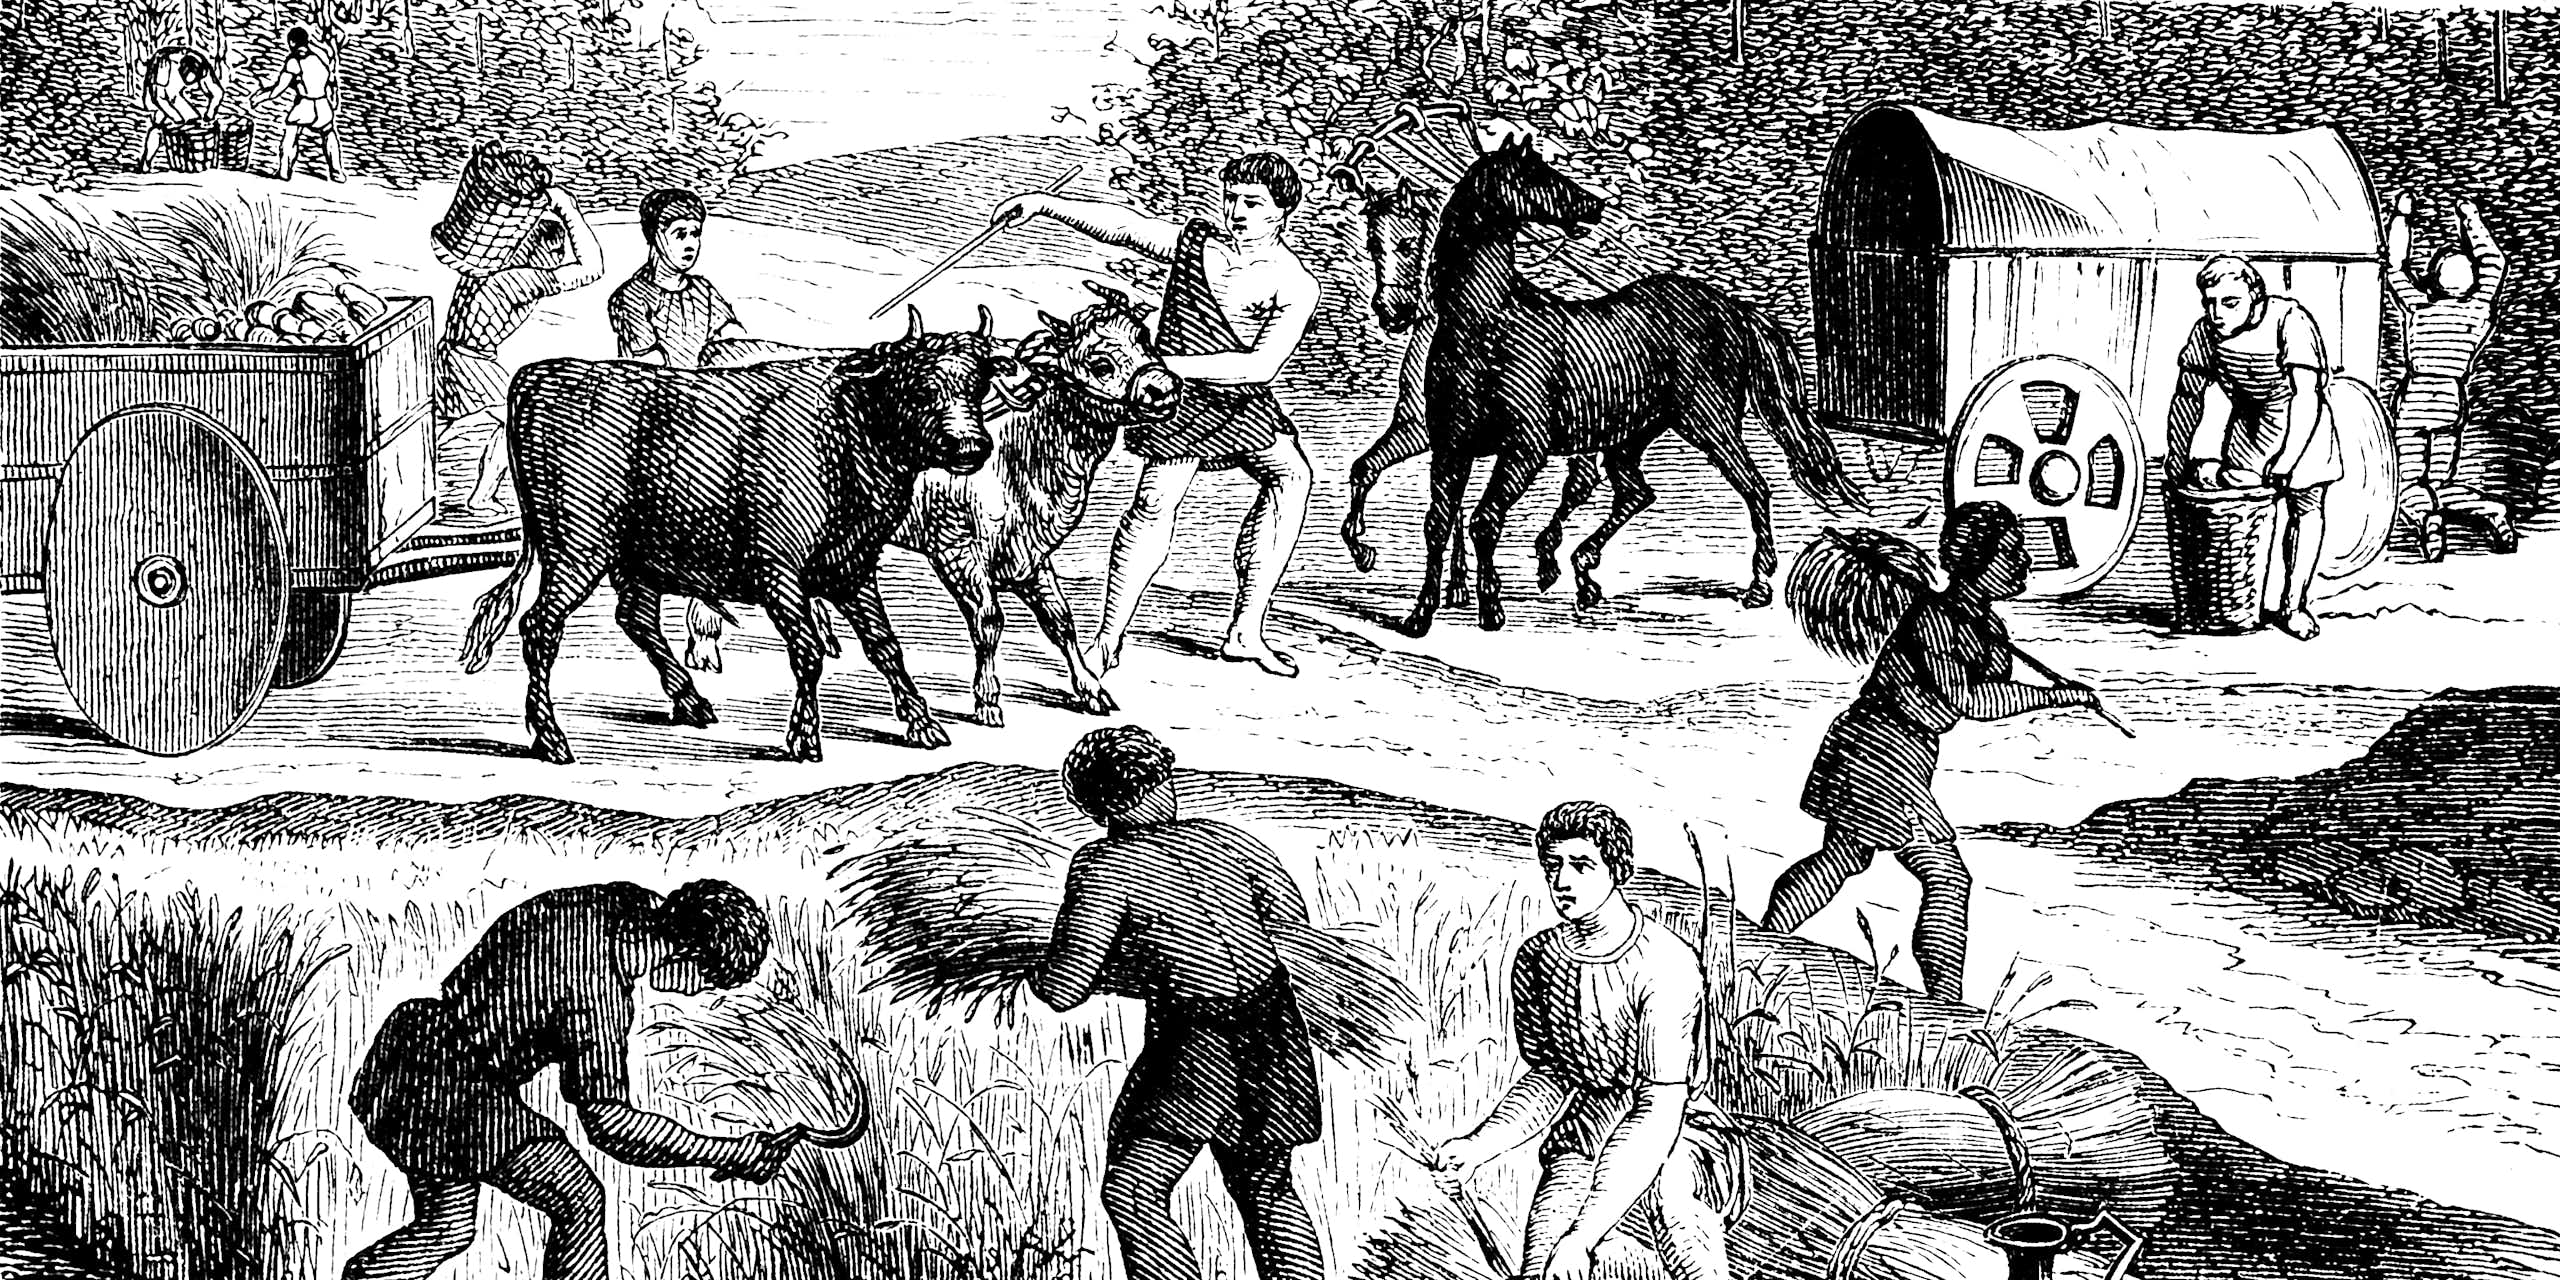 etching of people in ancient Roman garb harvesting grain and using oxen and horses